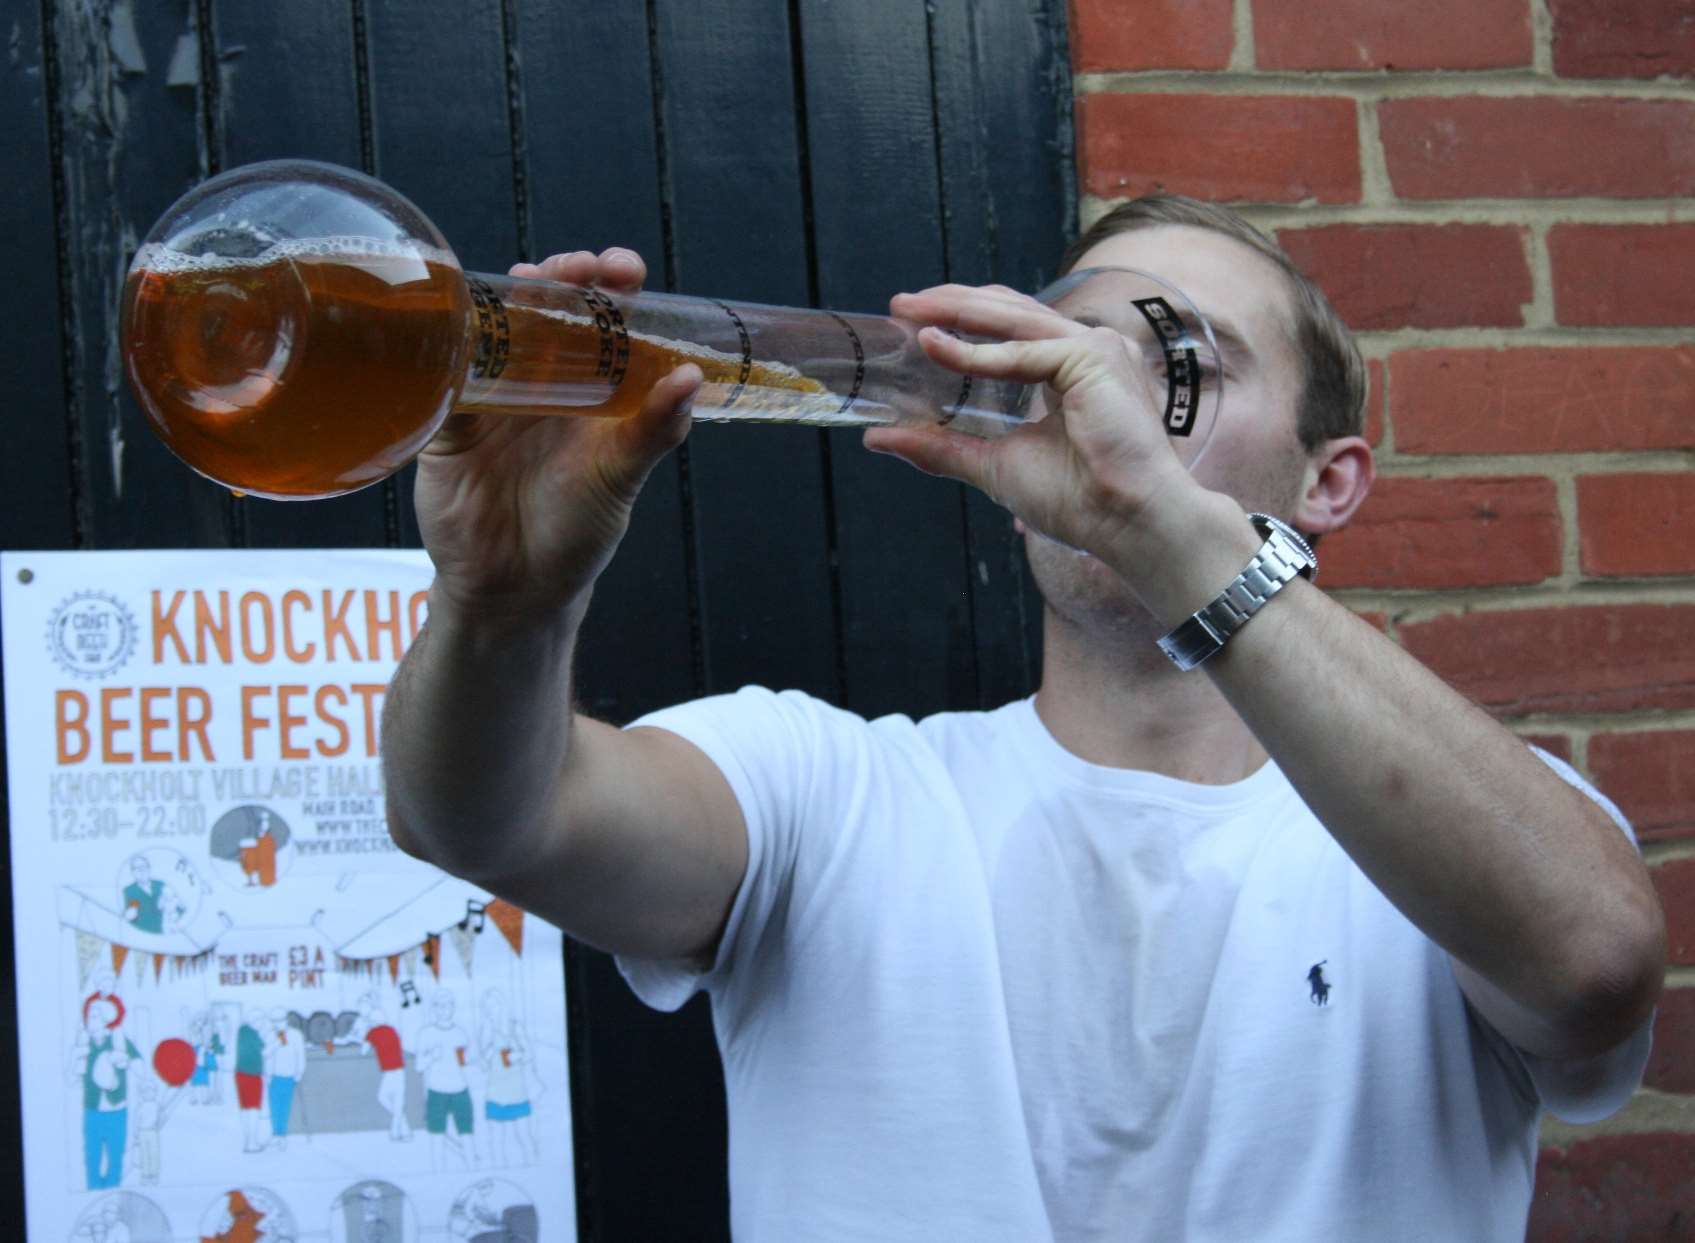 One reveller attempted the yard of ale challenge